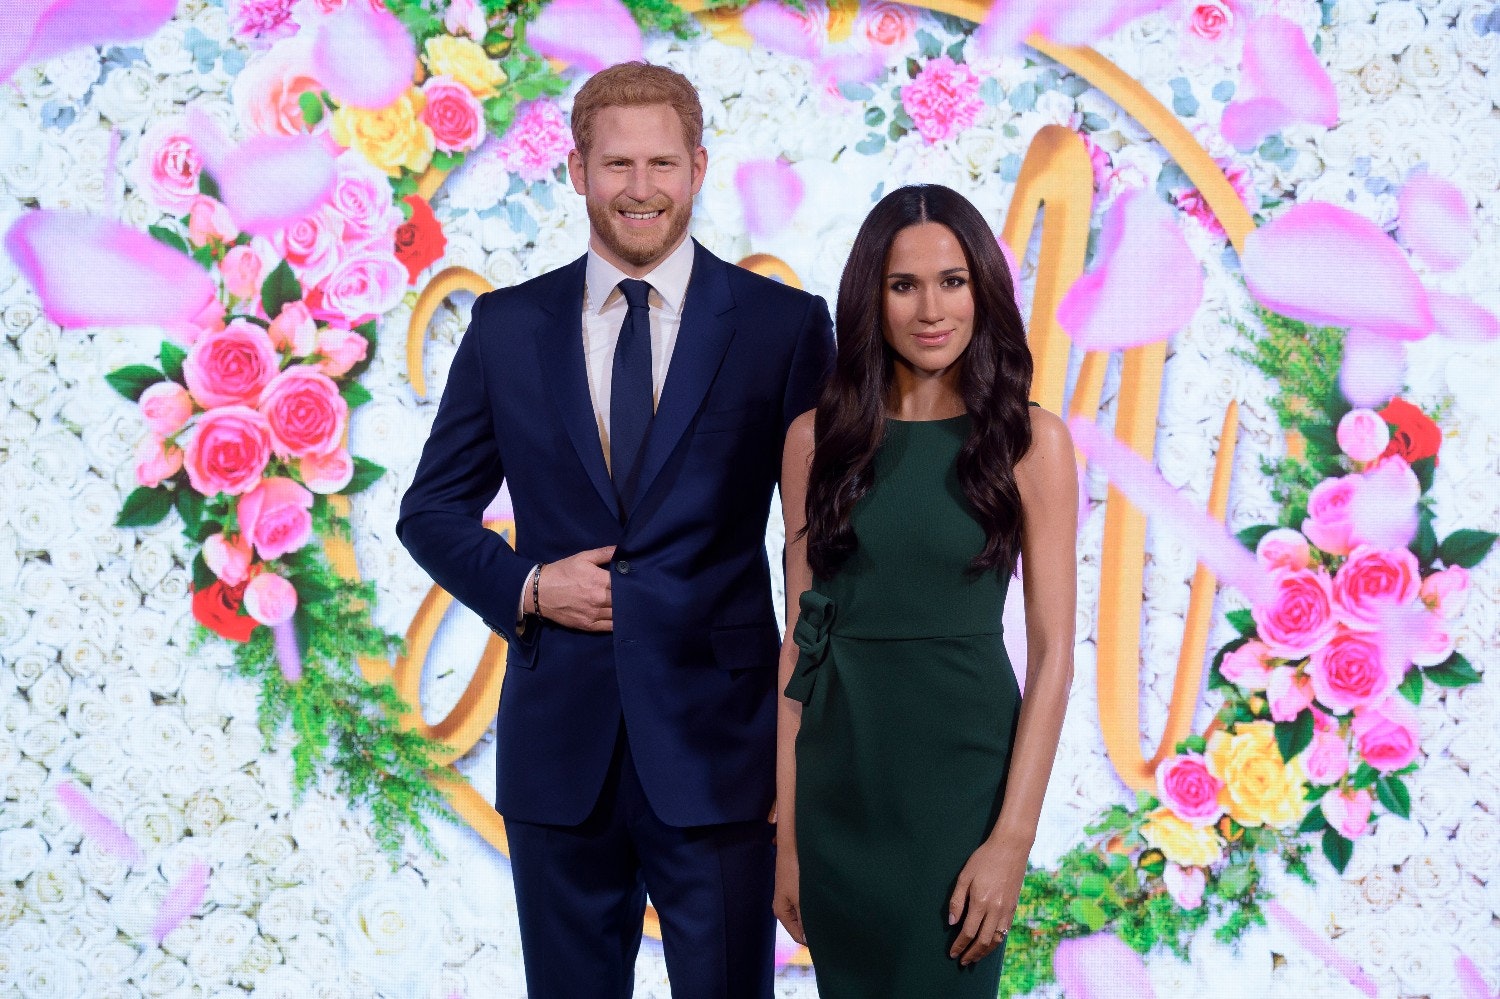 Meghan and Harry arriving at Madame Tussauds London